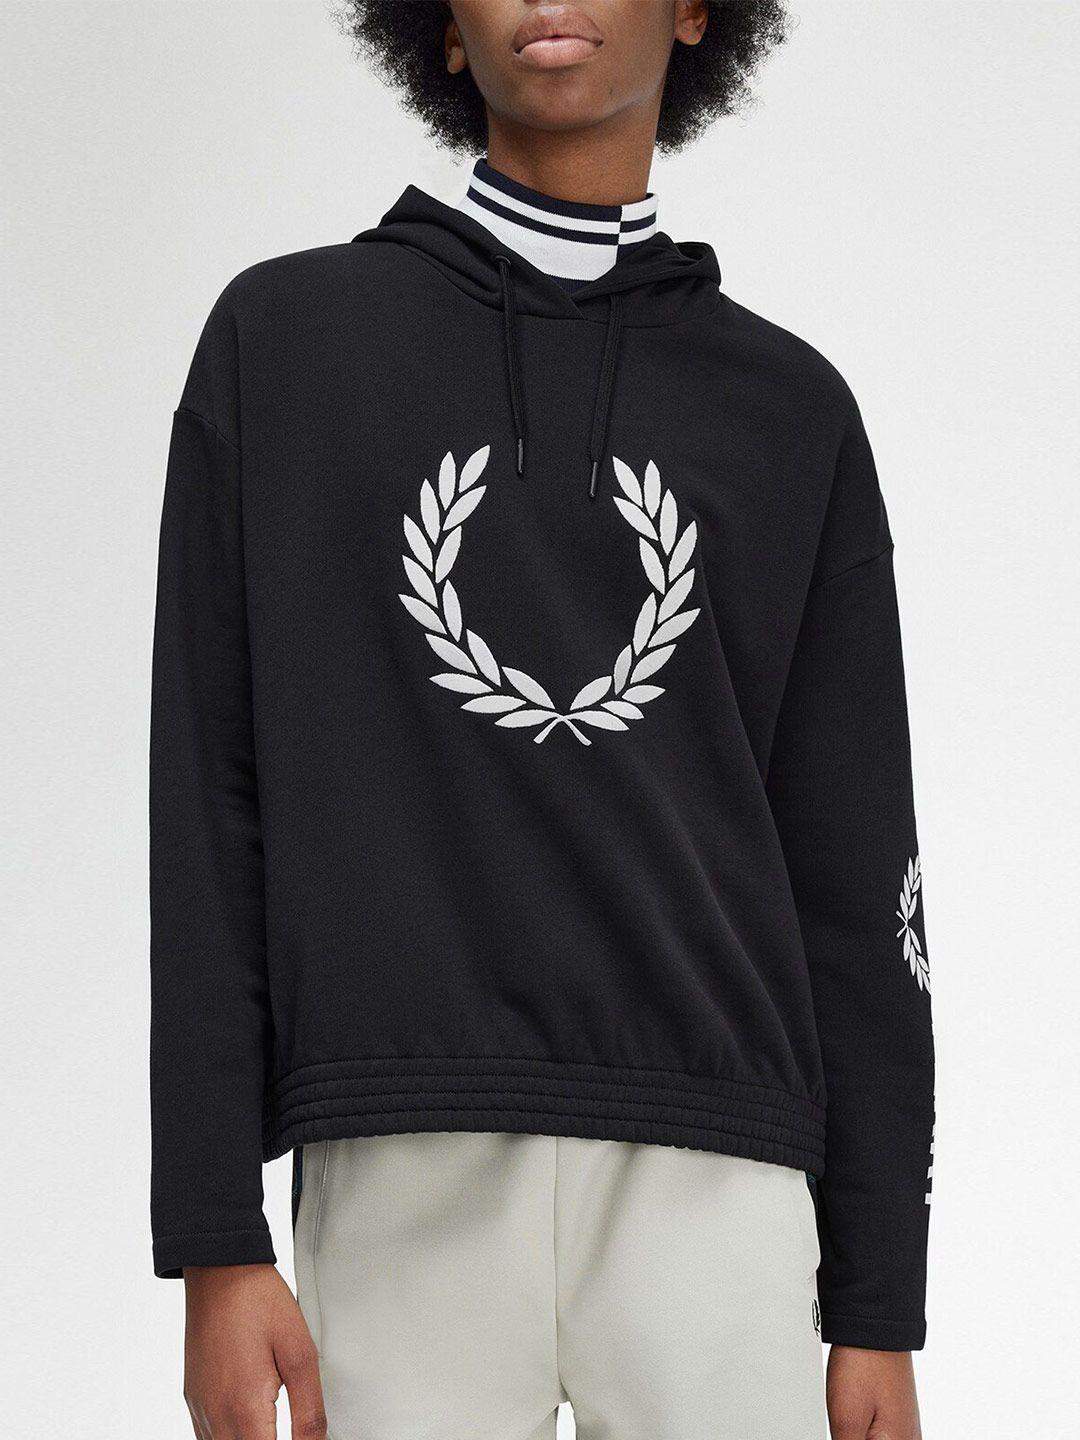 fred perry brand logo printed hooded cotton pullover sweatshirt